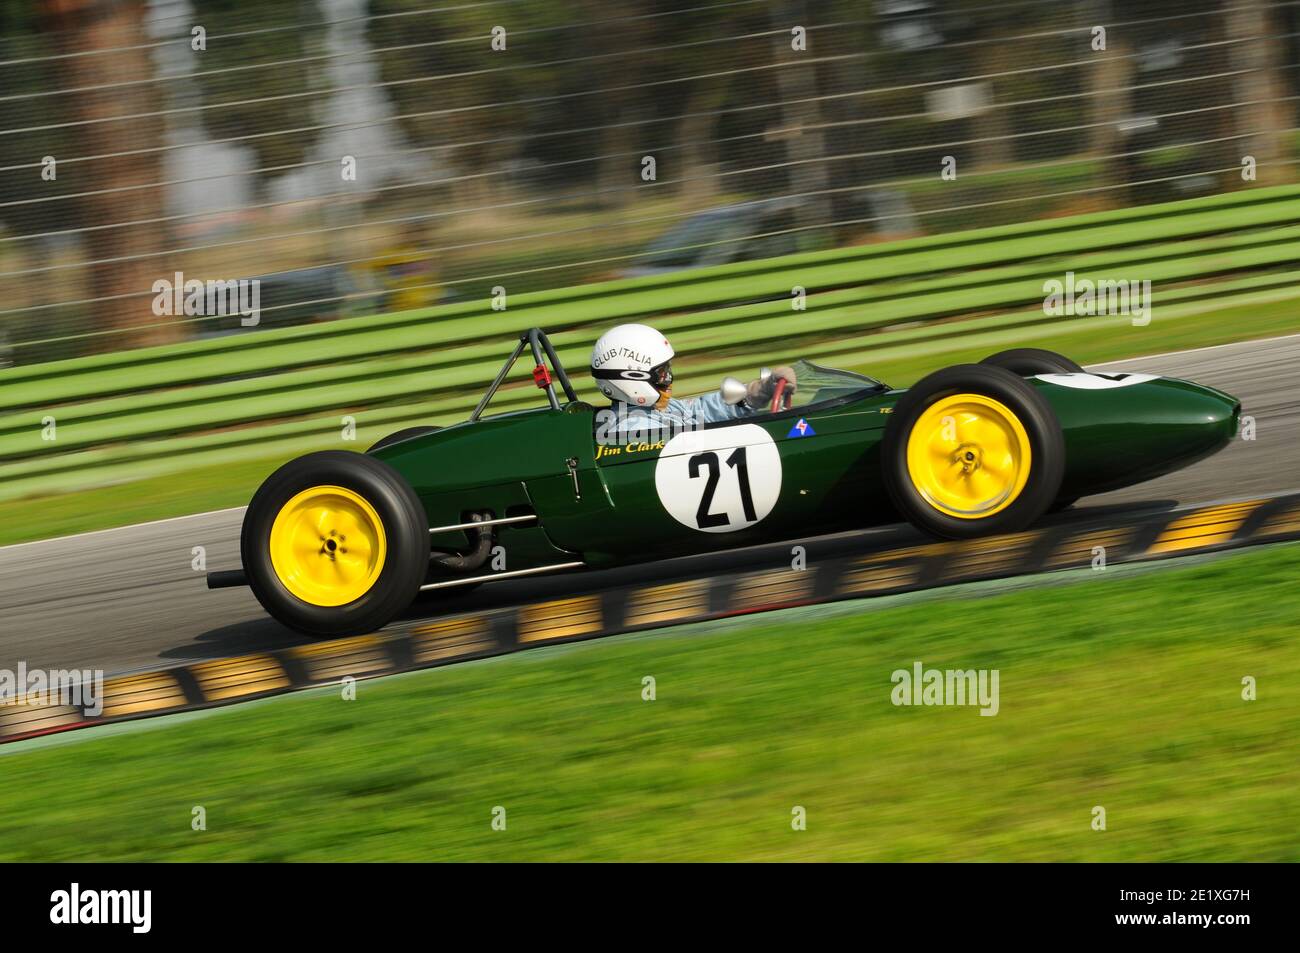 Imola Italy - 20 October 2012: unknown drive the Lotus 21 during practice session on Imola Circuit at the event Luigi Musso Historic GP 2012, Italy. Stock Photo